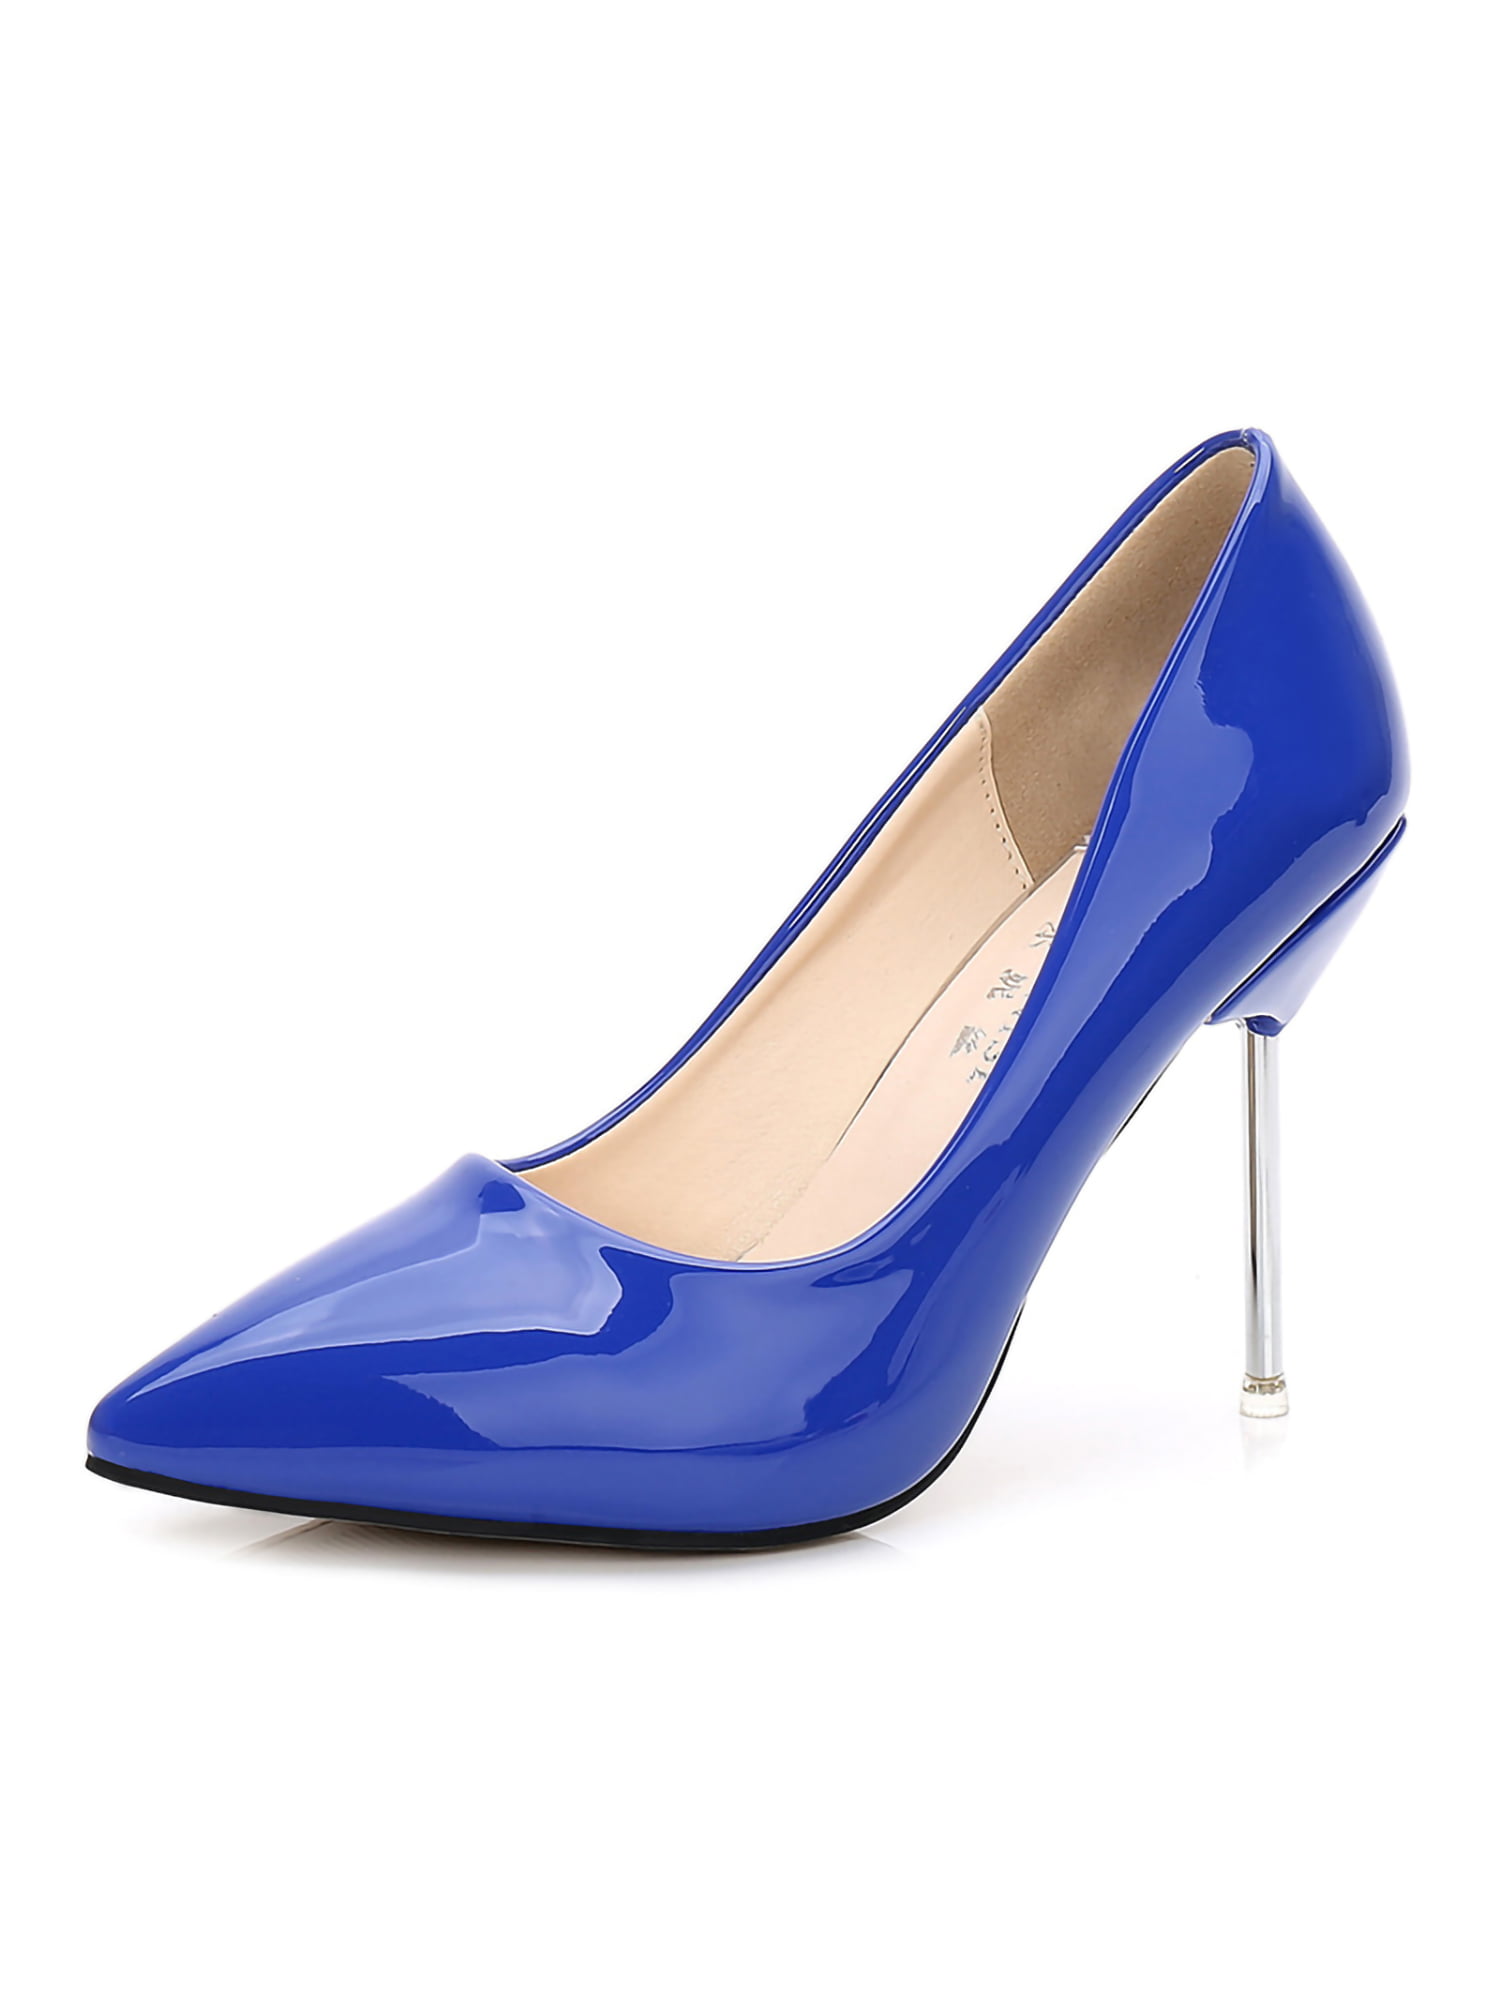 Women's Low Mid Kitten Heels Office Work Patent Leather Pointed Toe Pumps Shoes 